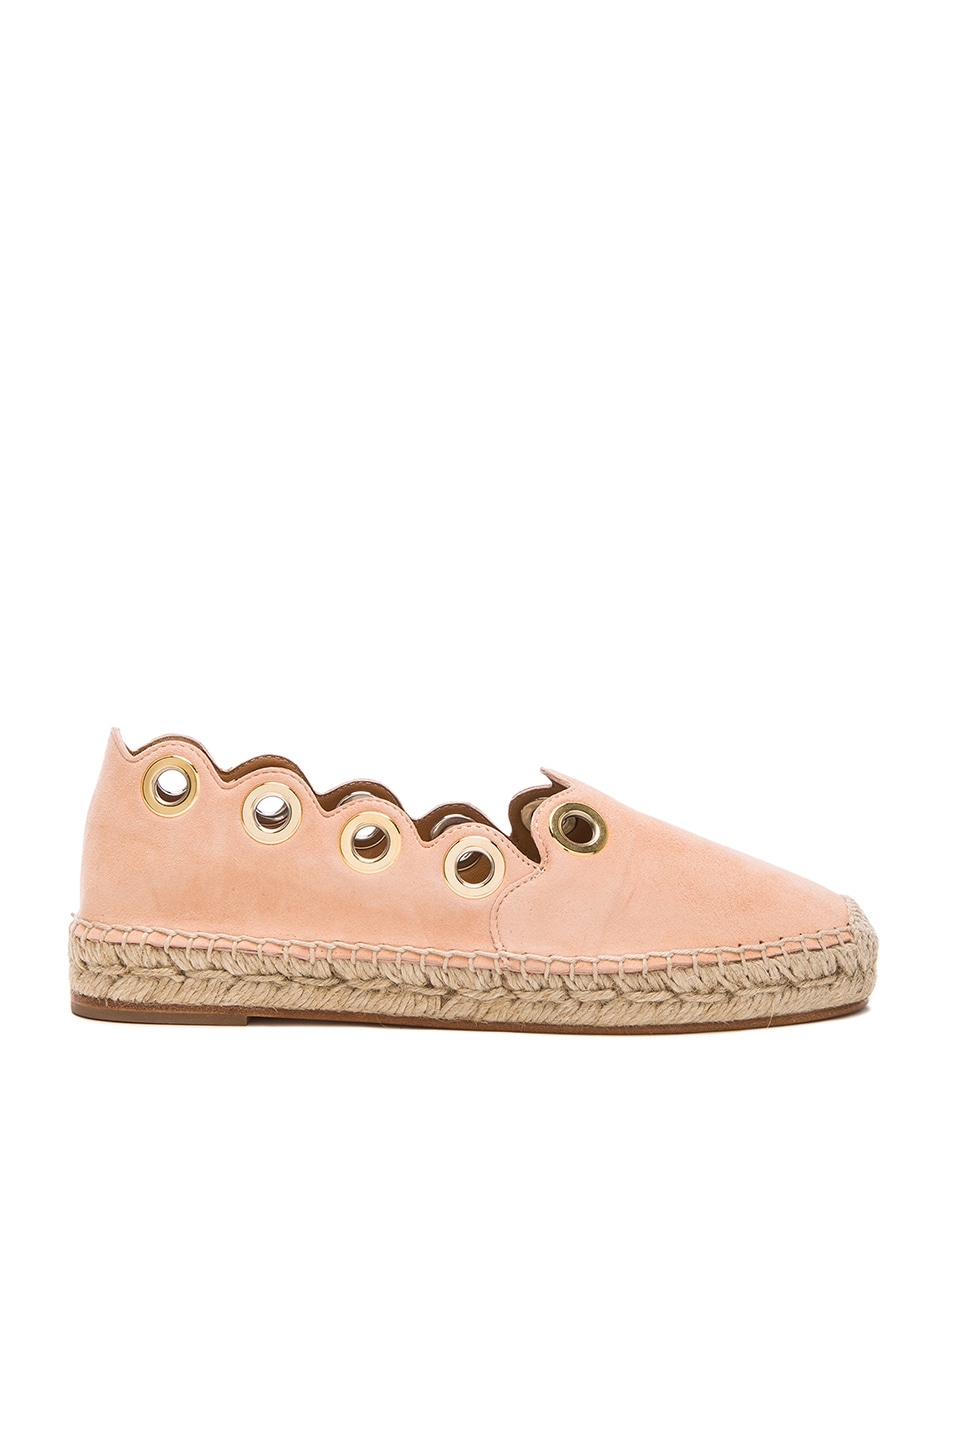 Image 1 of Chloe Suede Scalloped Espadrilles in Nude Pink